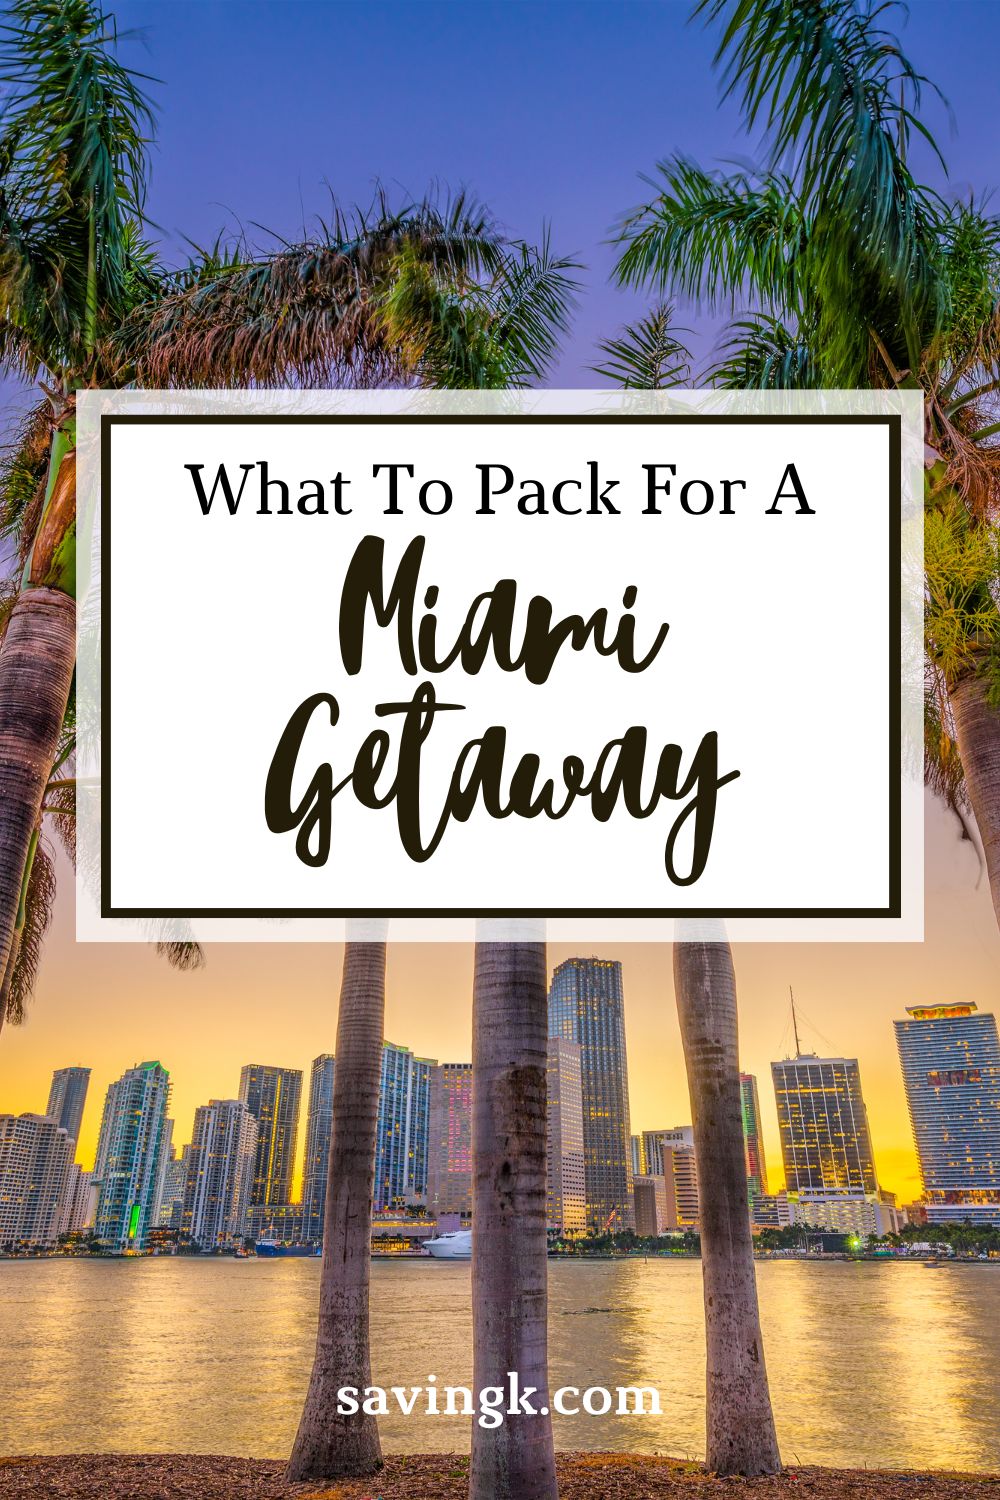 Packing for a Miami Getaway: Essentials and Outfit Ideas